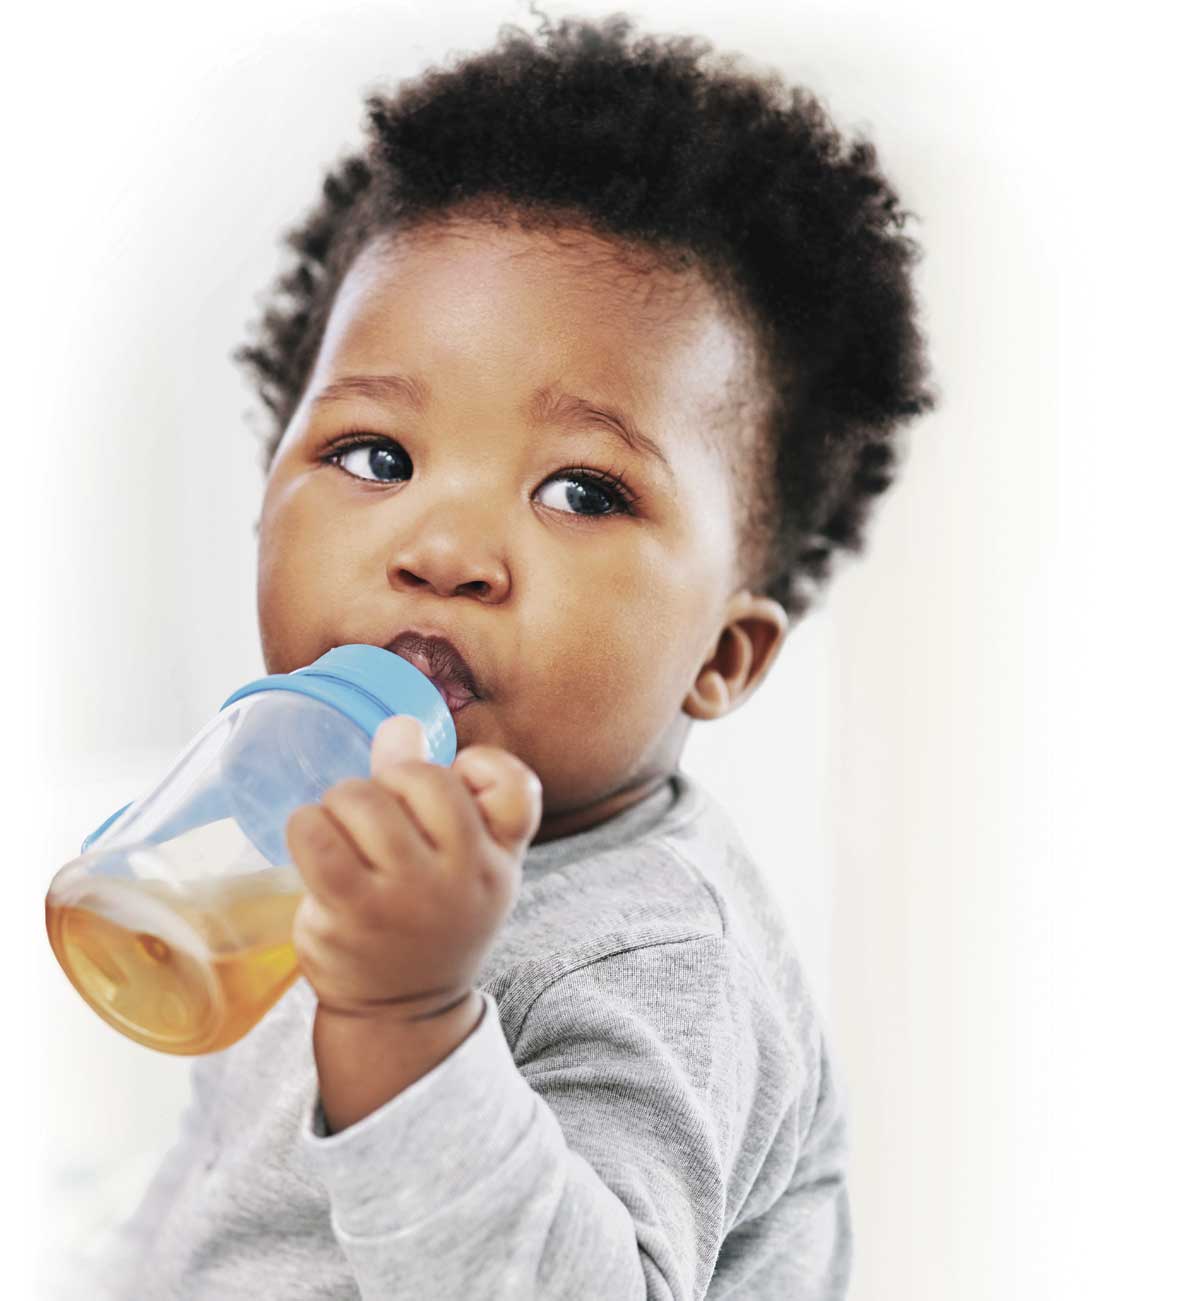 Reading between the lines: Popular toddler drinks are not healthy